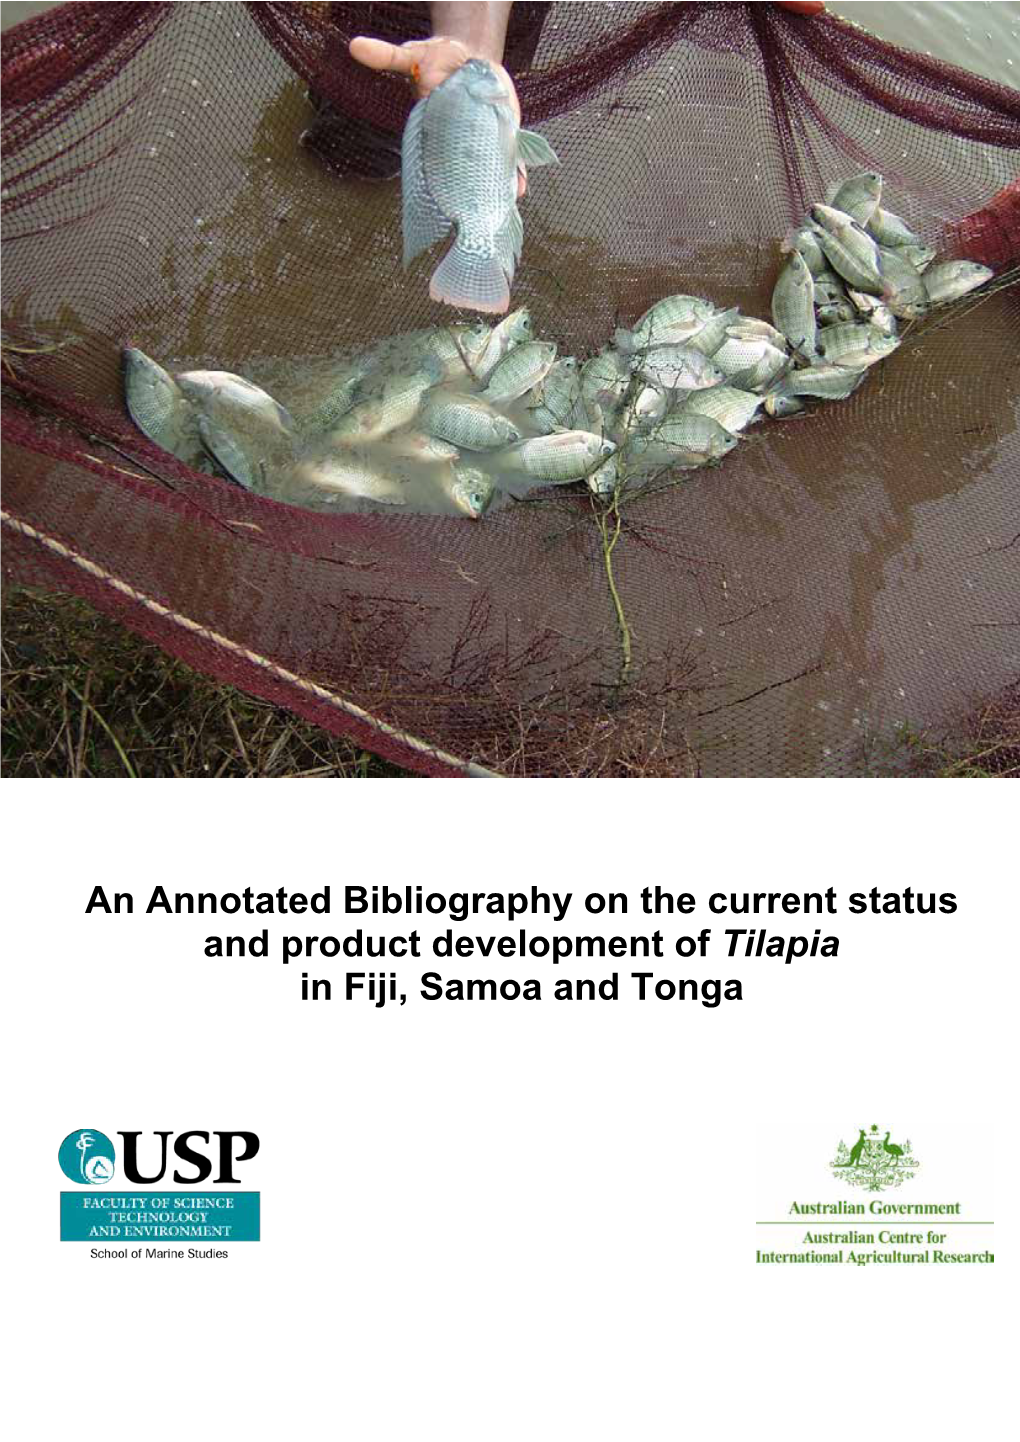 An Annotated Bibliography on the Current Status and Product Development of Tilapia in Fiji, Samoa and Tonga